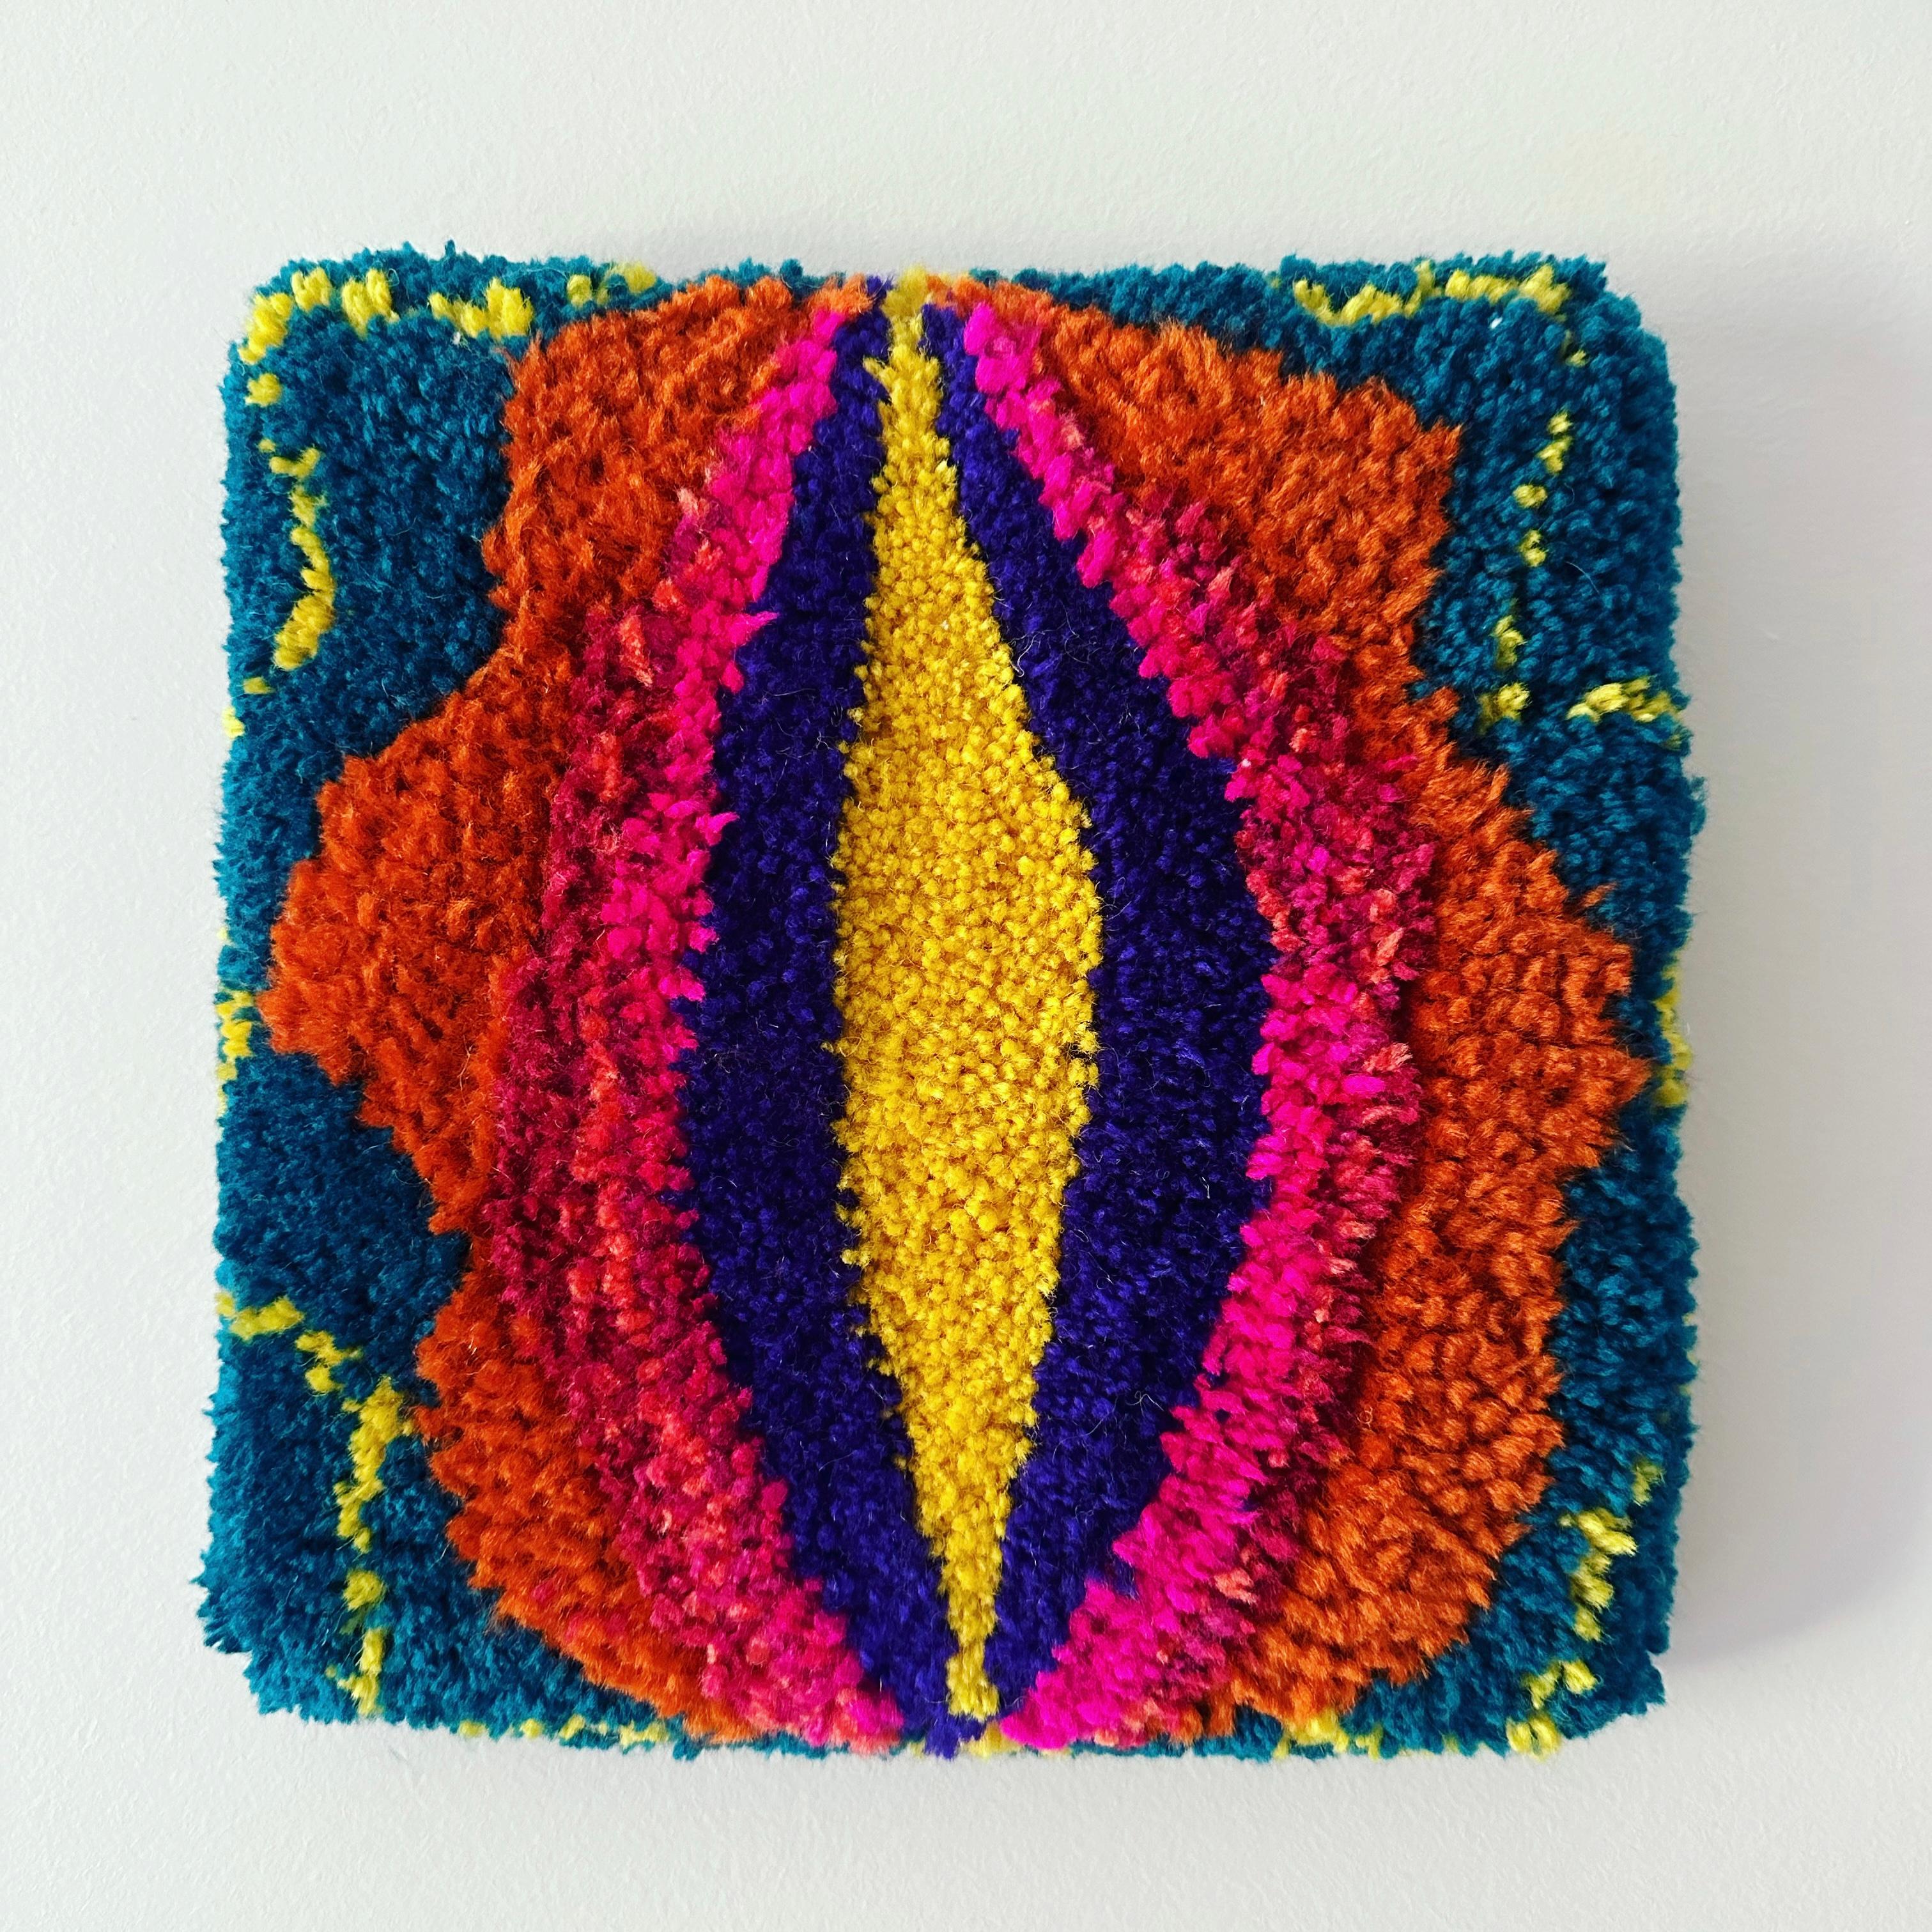 Semente (Seed), red, yellow, pink, purple, 3D, tufting, textile, texture - Sculpture by Ana Maria Farina